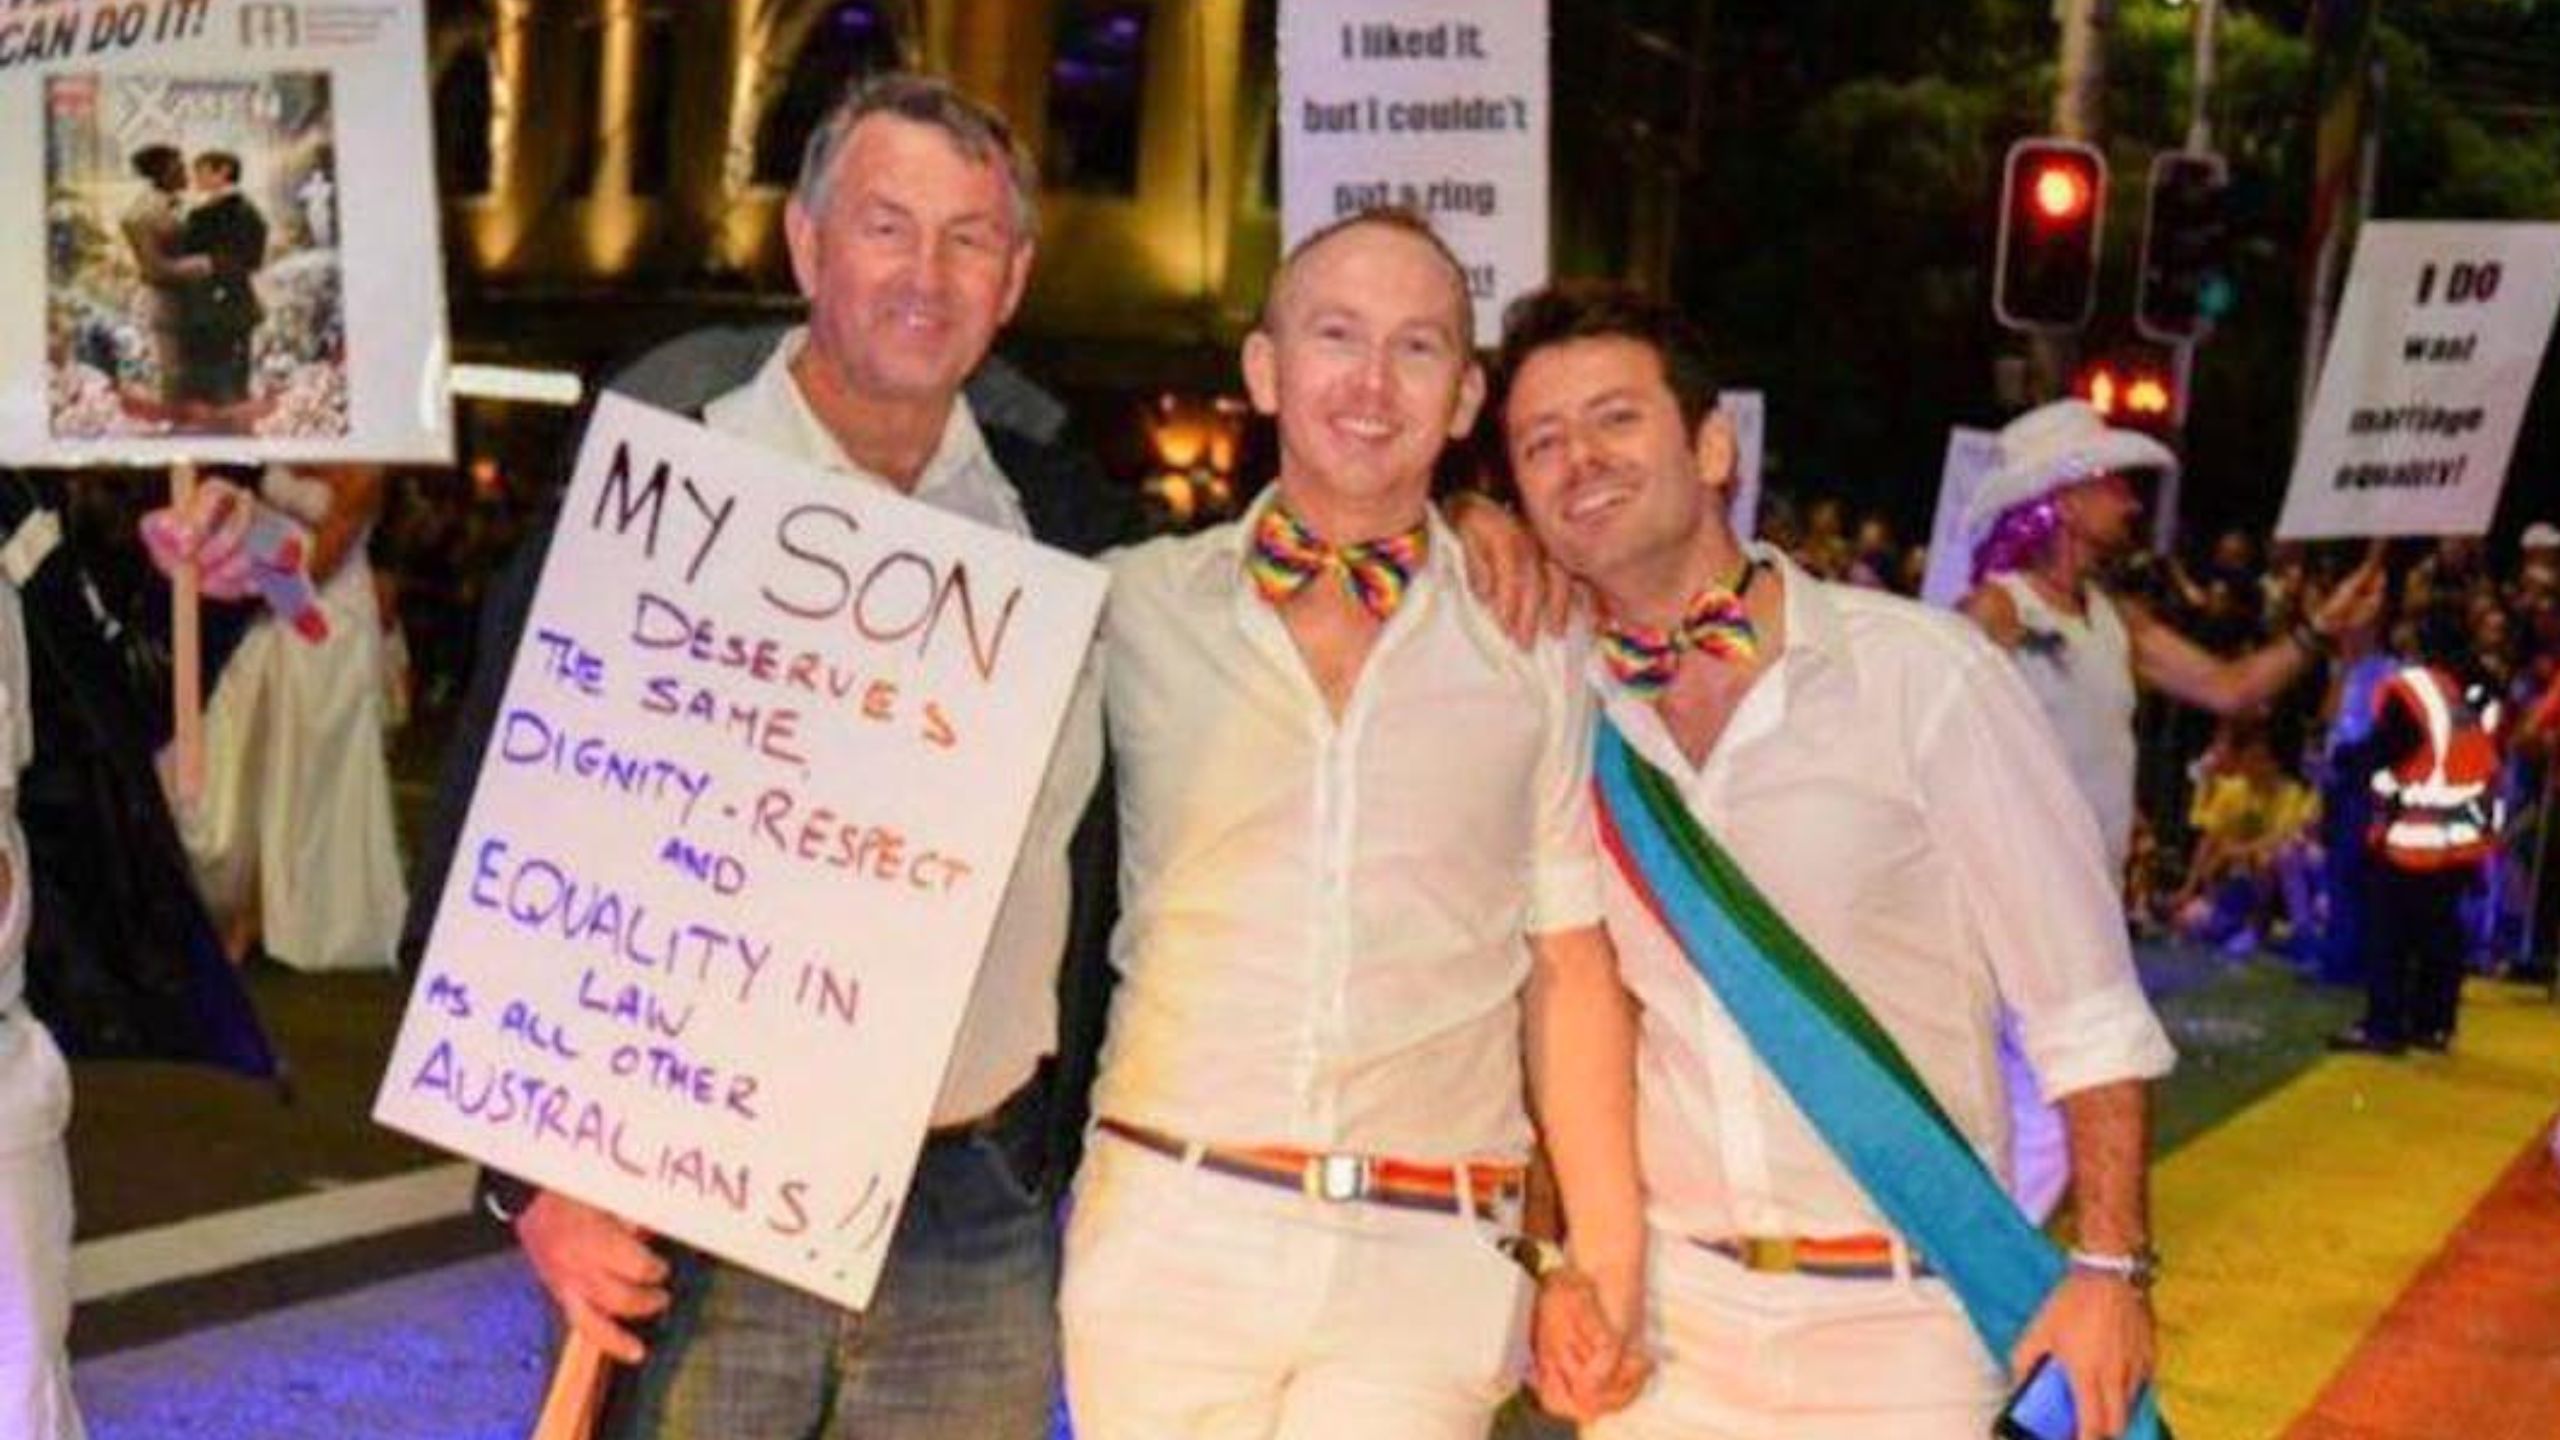 Nathan with his father, Geoff, and now husband, Maikol, during the parade. Nathan describes his dad as his biggest advocate and supporter. (Source: supplied)